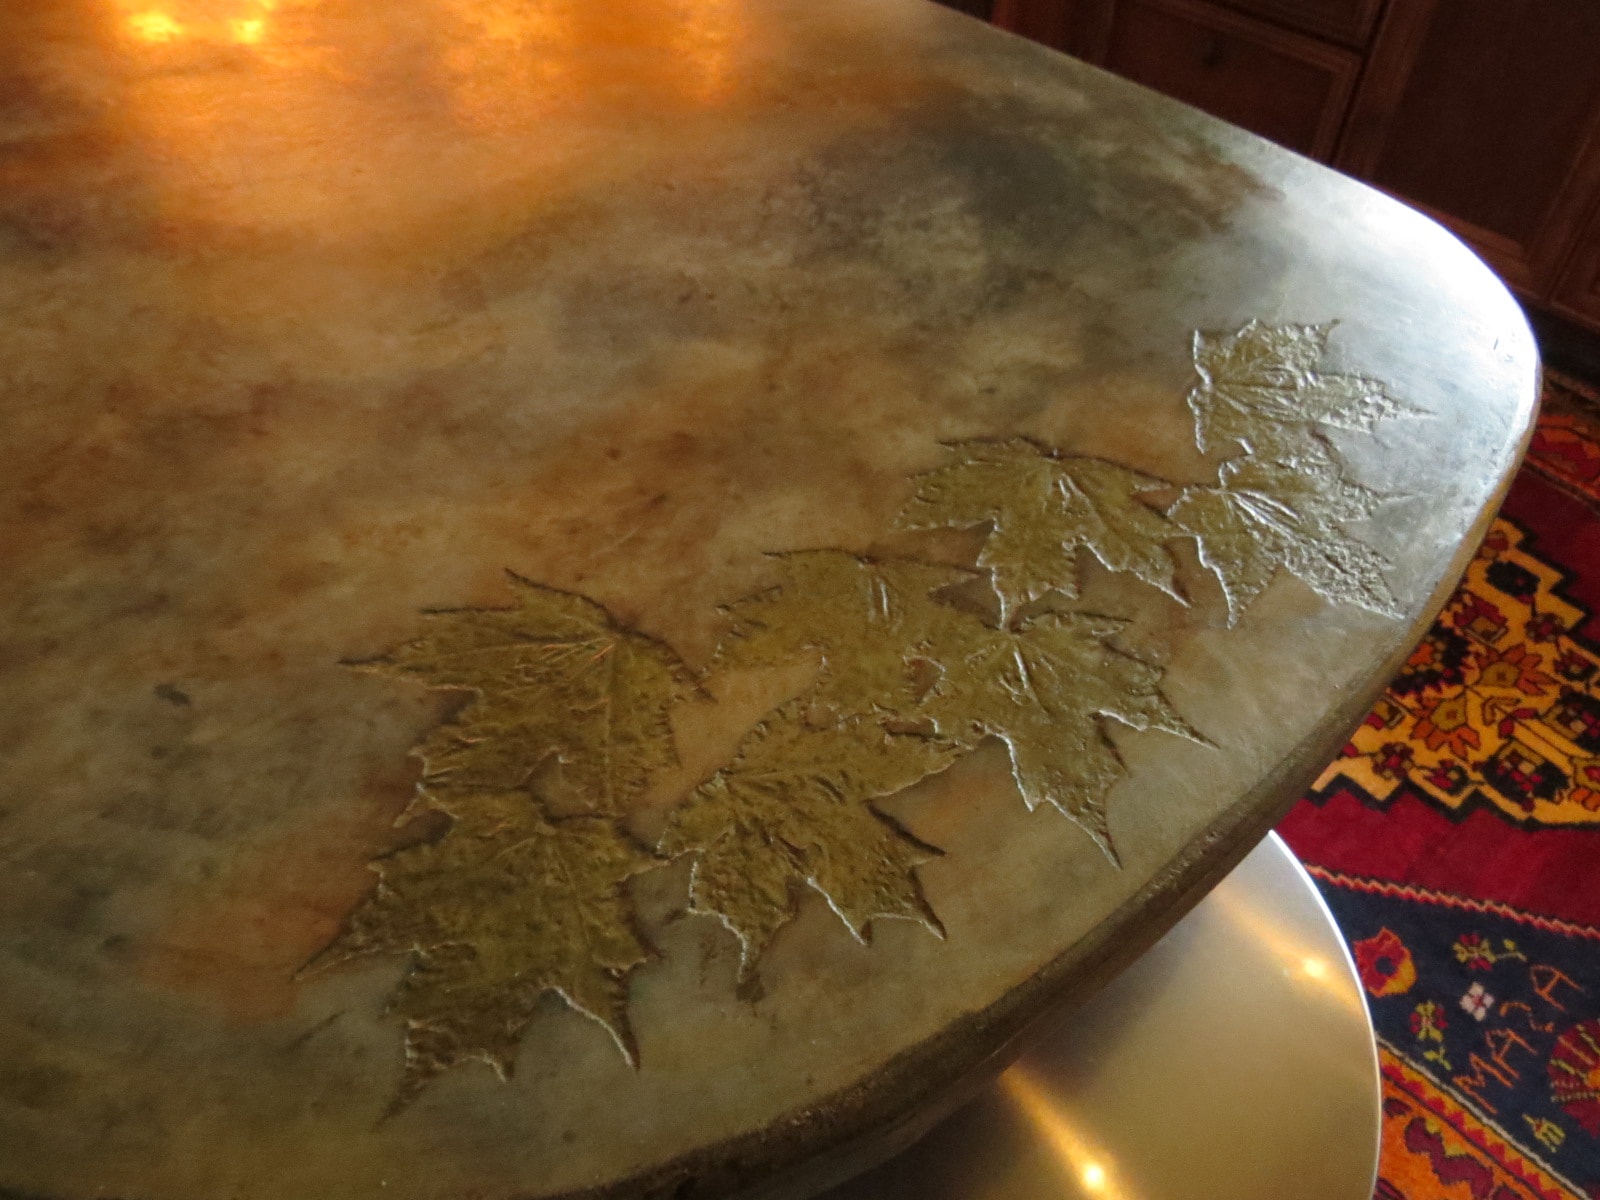 Maple leaf inlay on a countertop